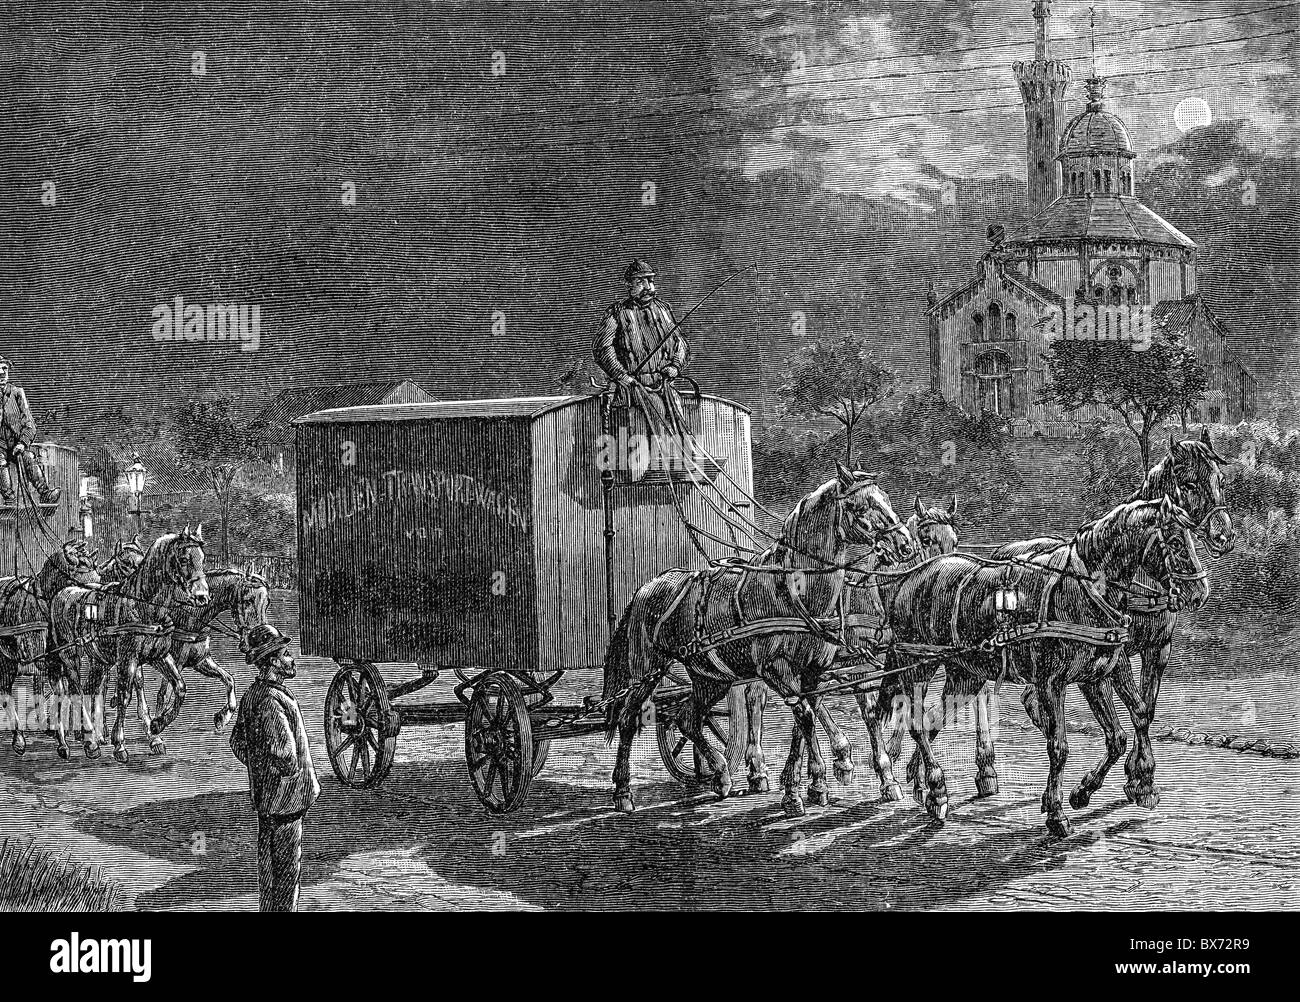 medicine, diseases, cholera, epedemic in Hamburg, 1892, transport of the dead Ohlendorf Cemetary at night, wood engraving after drawing by G. Arnould, October 1892, funiture carriage, death, helpers, people, disease, epedemic, Germany, Imperial Era, 19th century, historic, historical, Additional-Rights-Clearences-Not Available Stock Photo